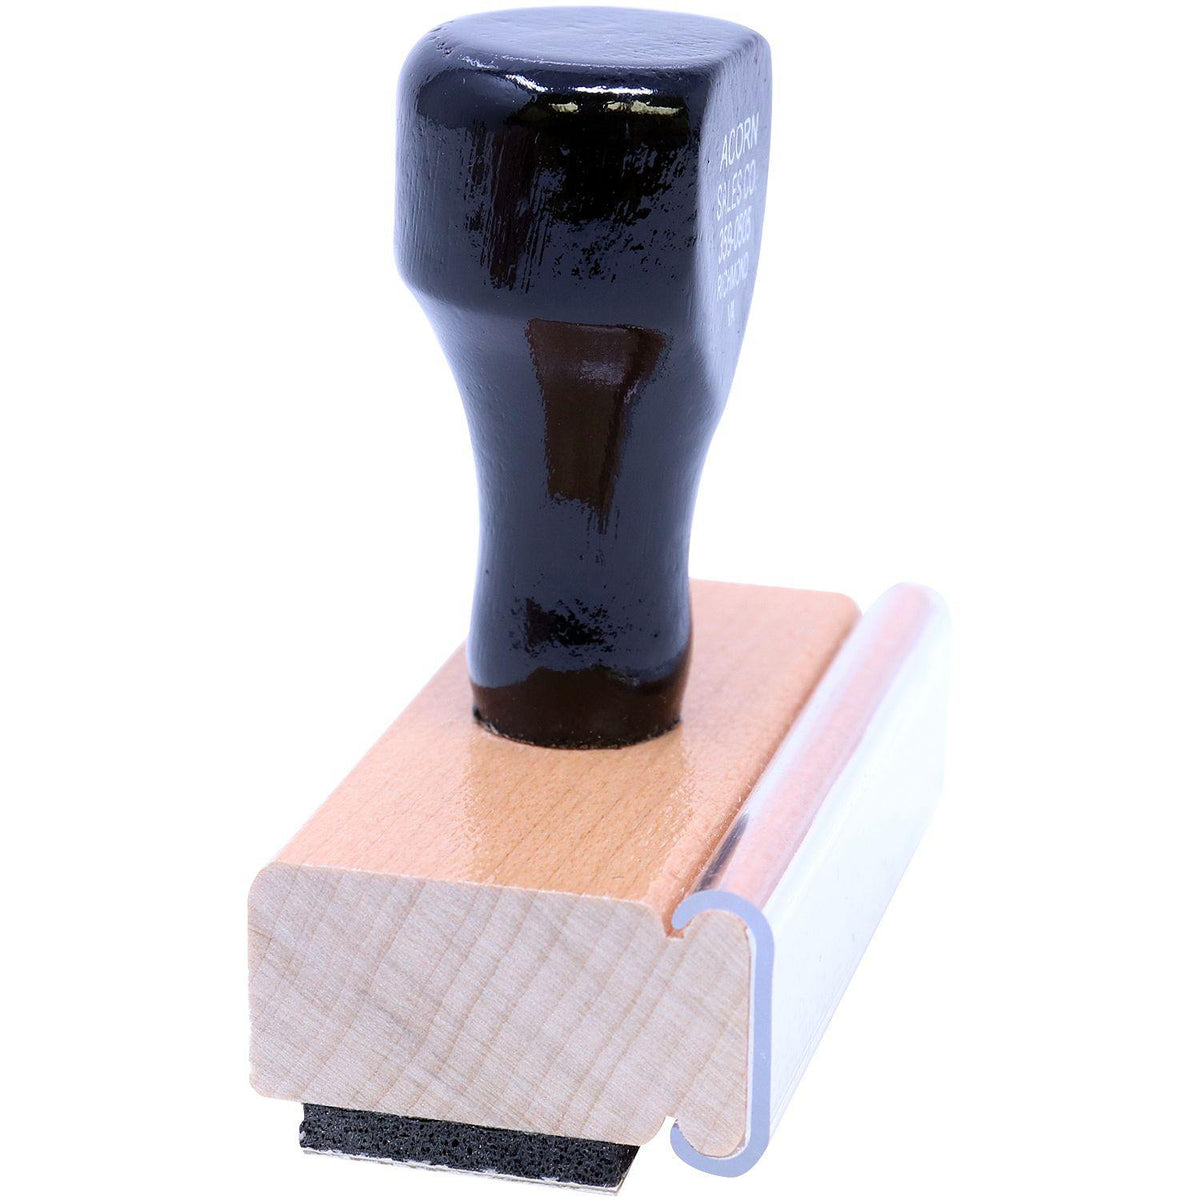 Side View of Large SAM Rubber Stamp at an Angle